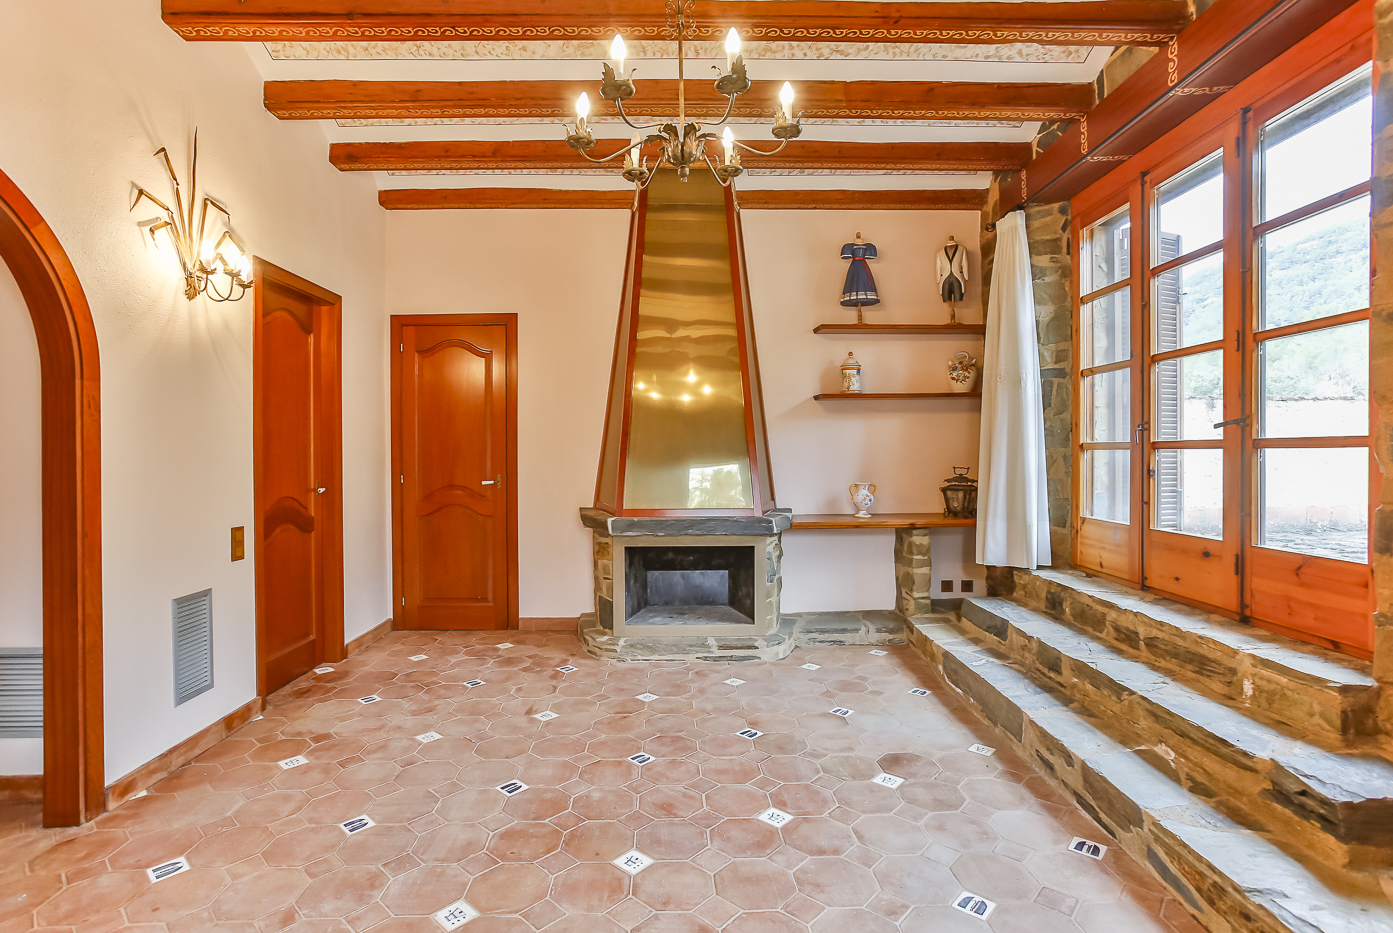 Spectacular farmhouse for sale completely renovated